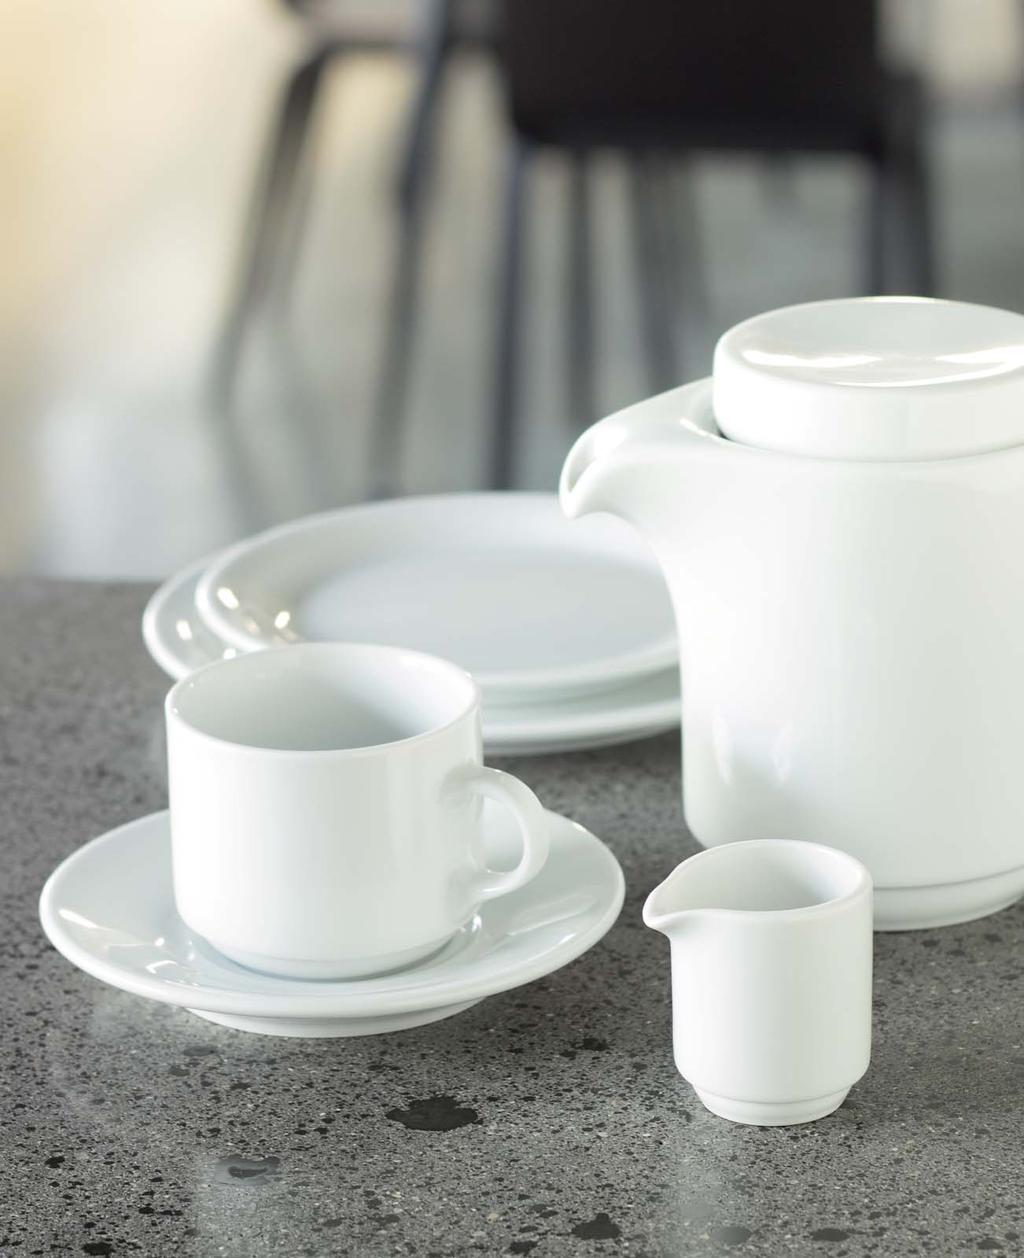 CITY /Design Pierre Renfer/ Designed in the year 1964 to save space and to be easily stackable, CITY became the porcelain for the daily use in hospitals and canteens.